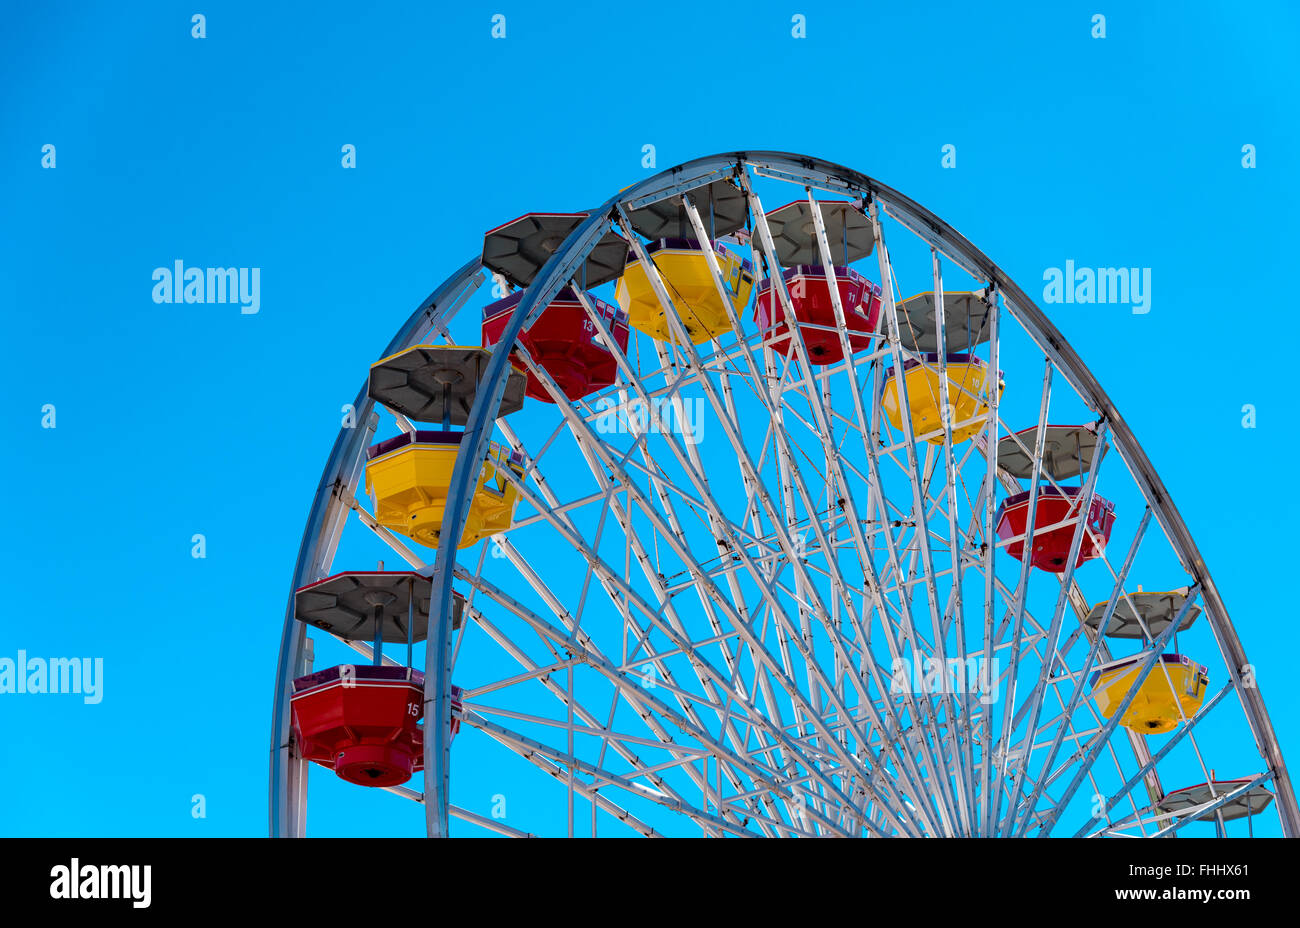 section of a ferris wheel against blue sky Stock Photo